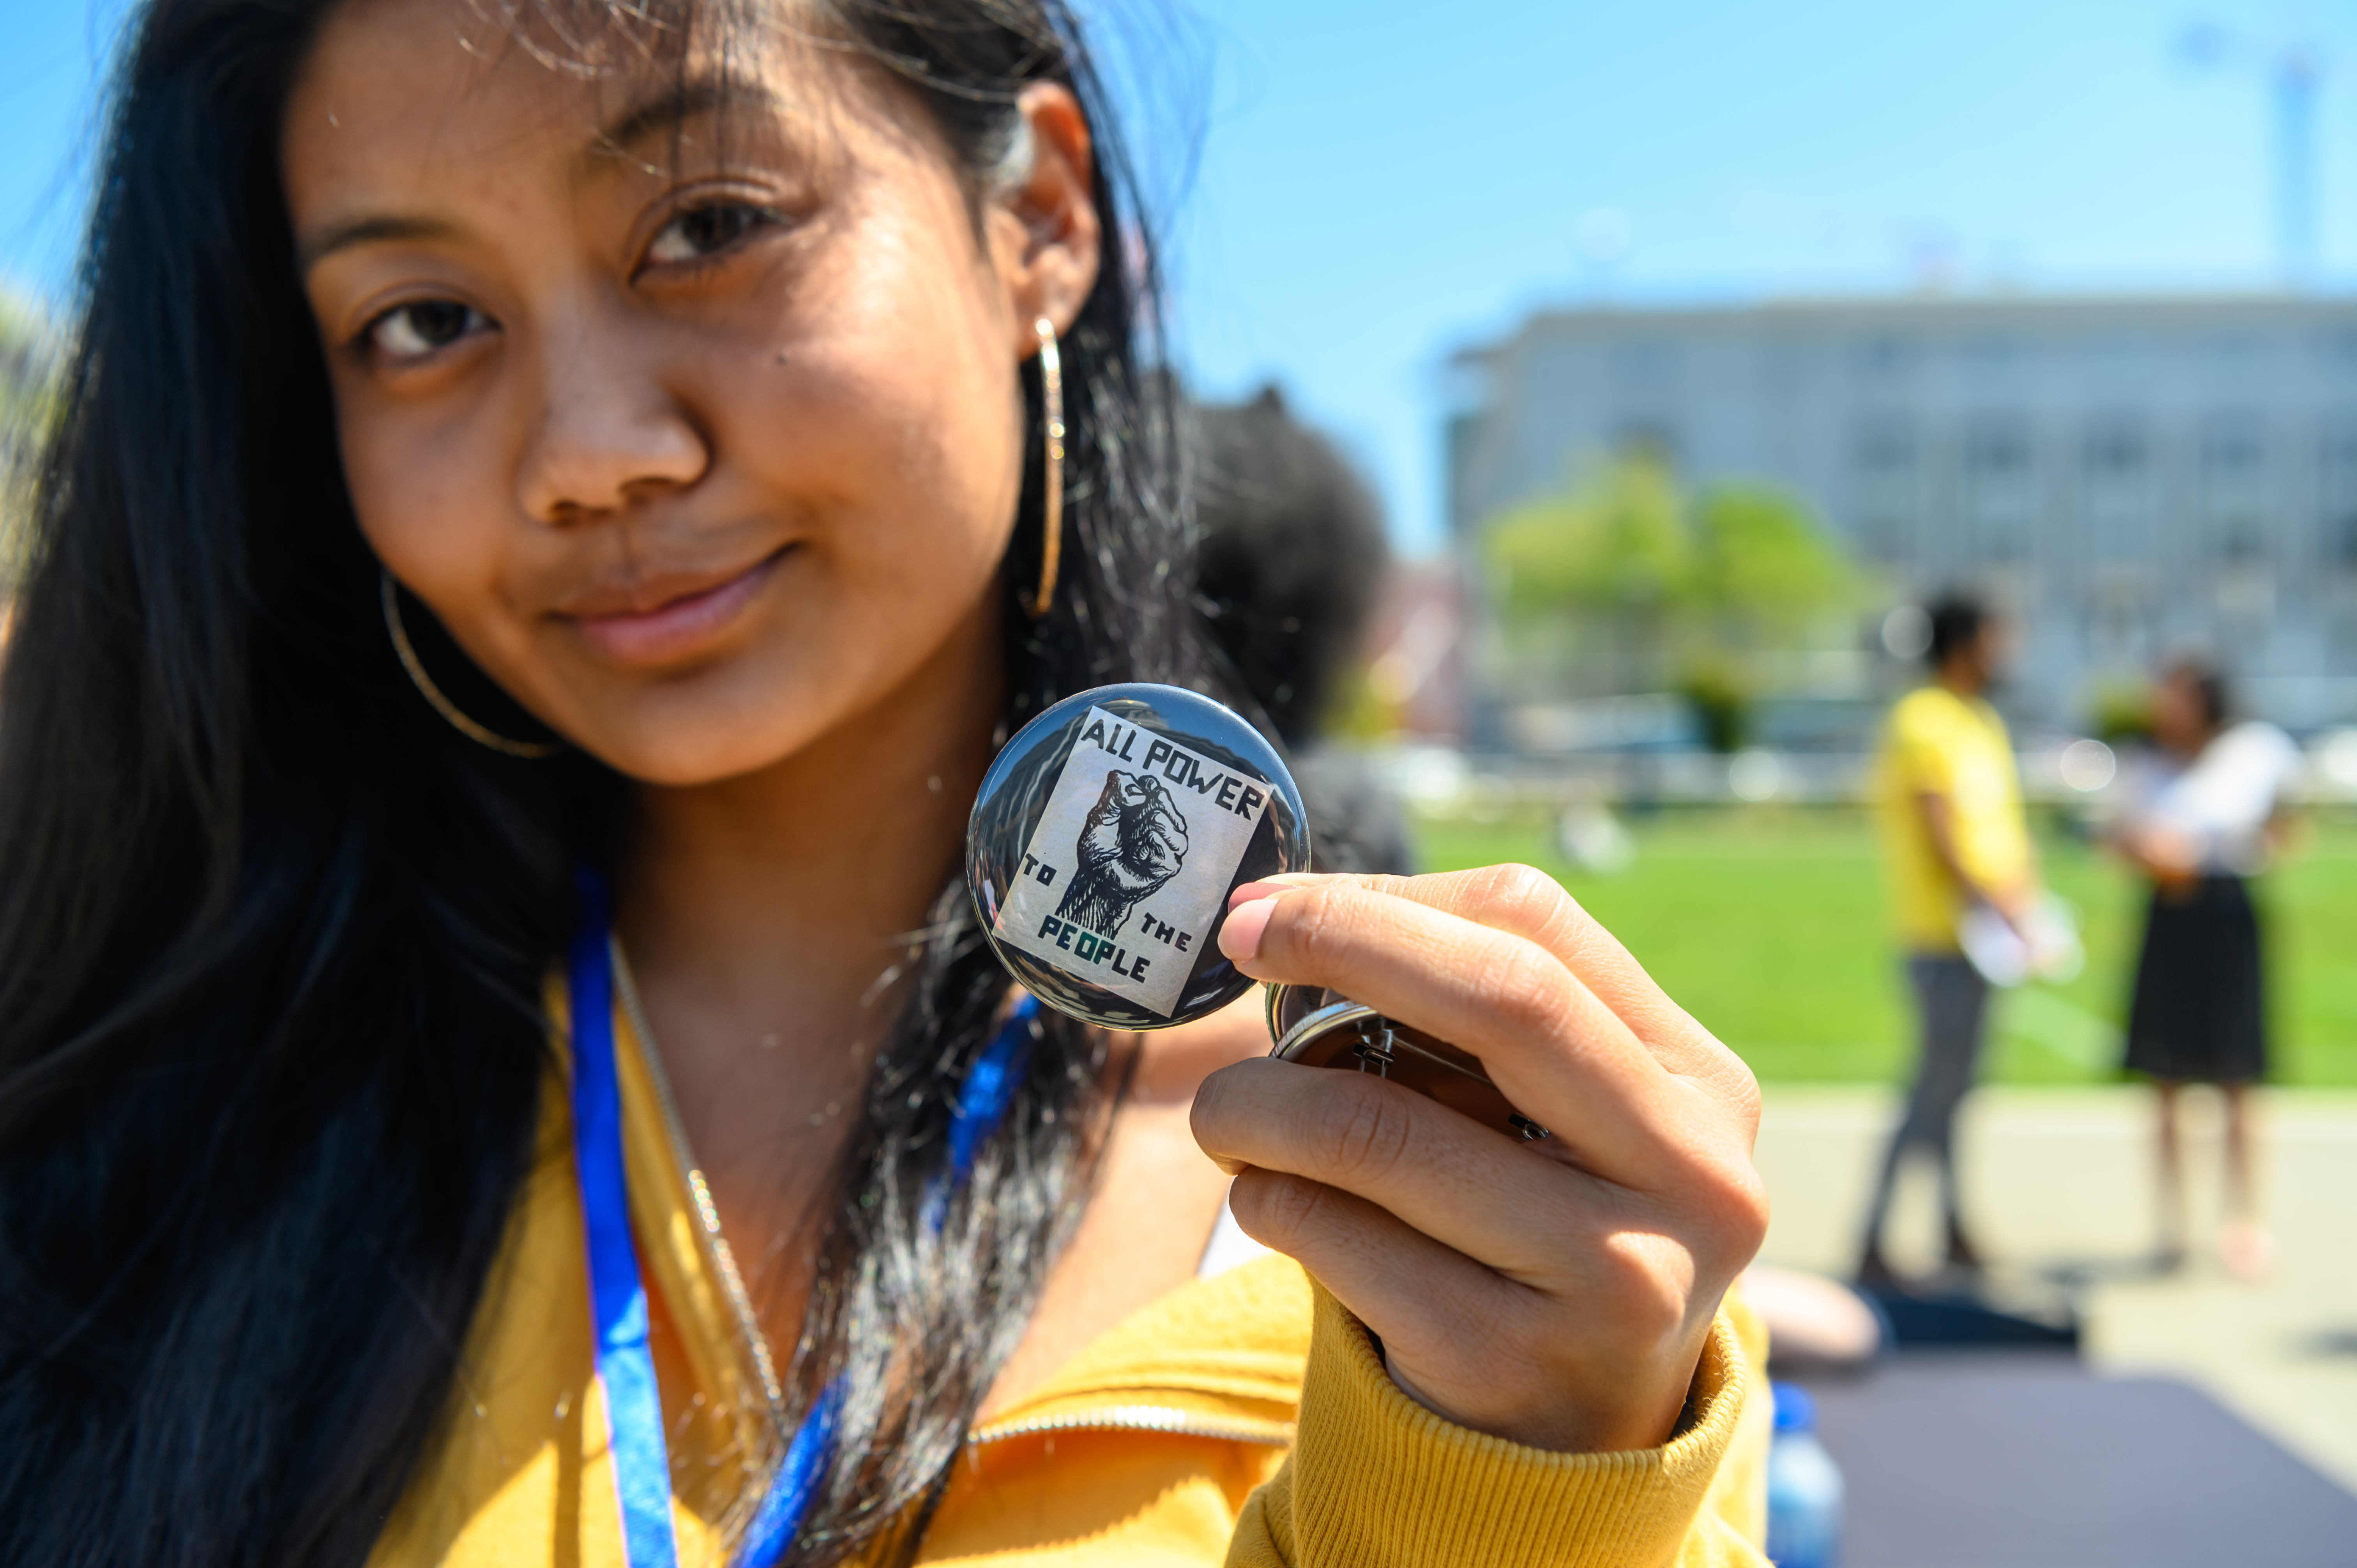 A young person holding a button with the words "power to the people"